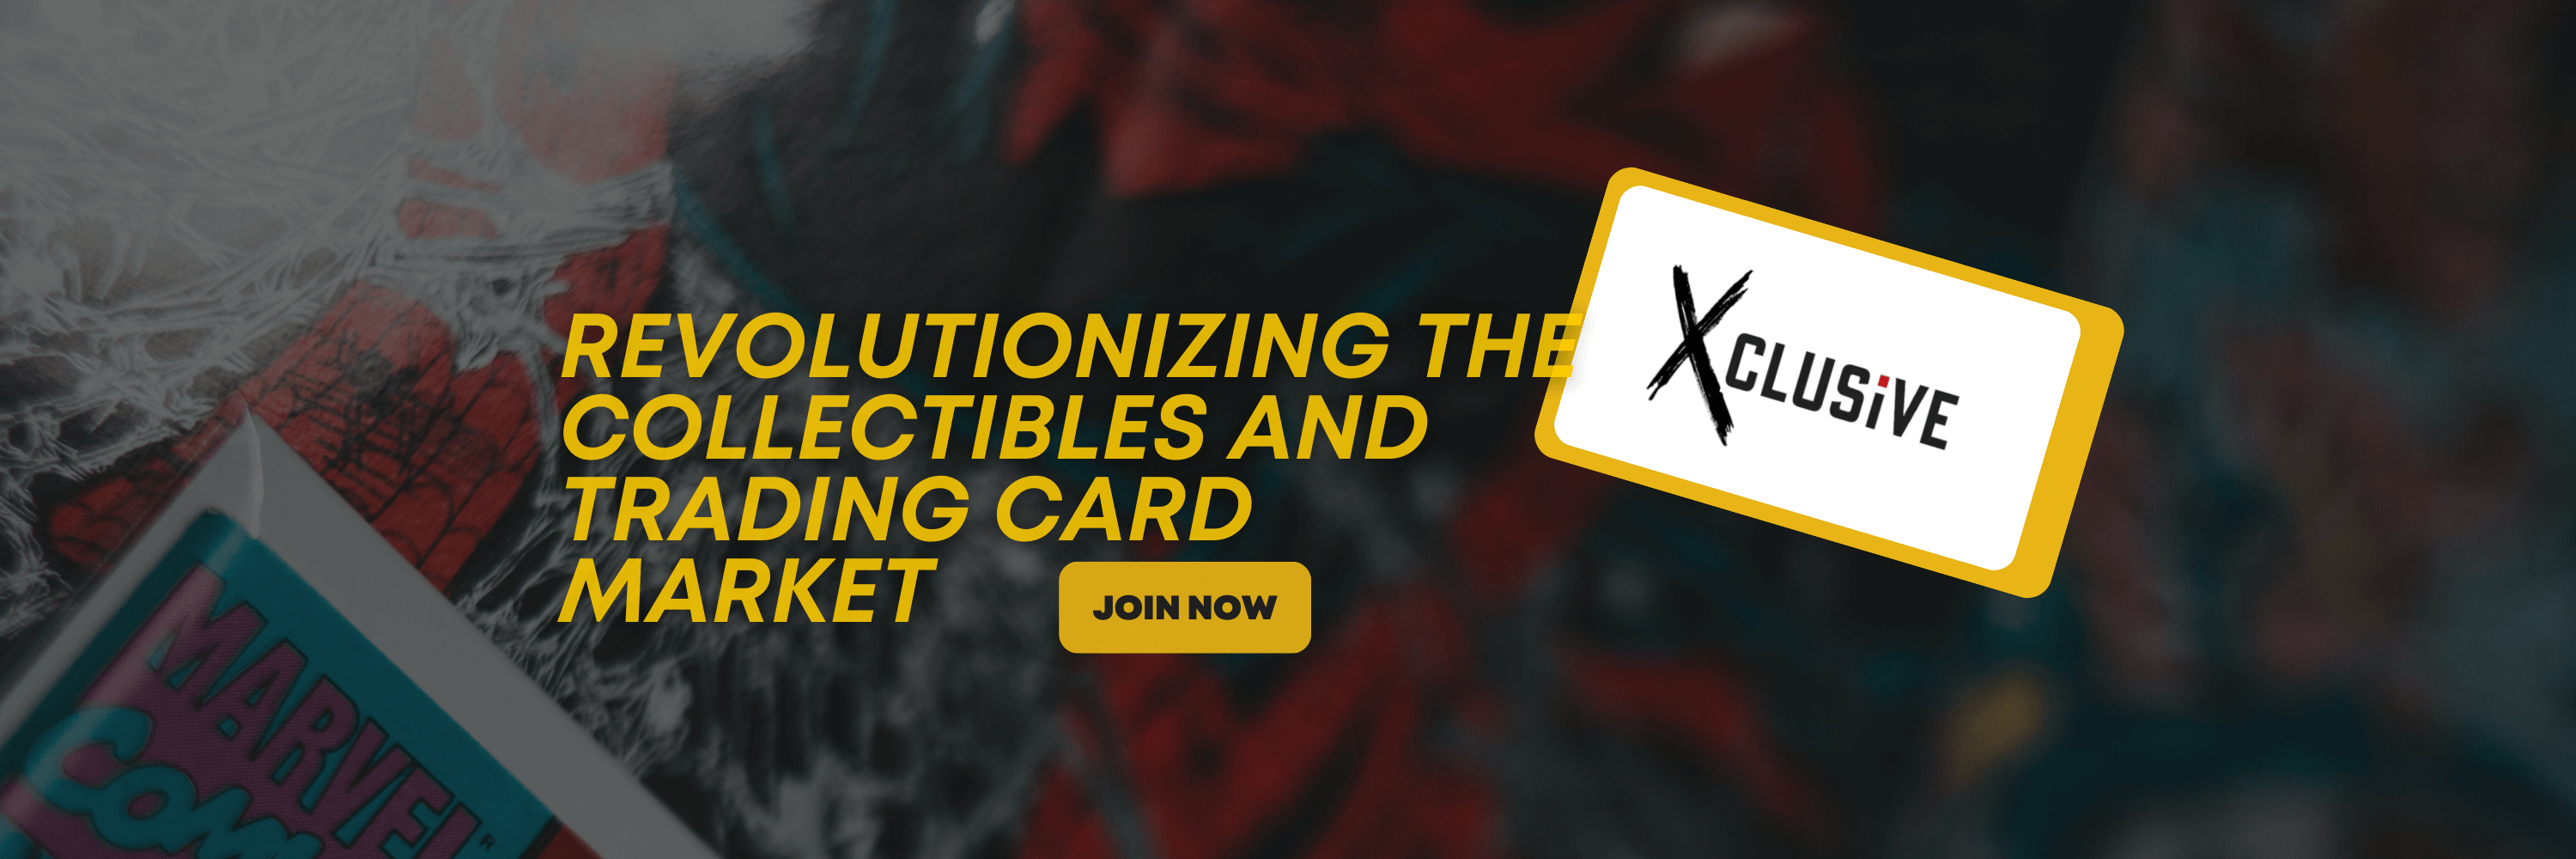 Revolutionizing the Collectibles and Trading Card Market with Xclusive Collectibles